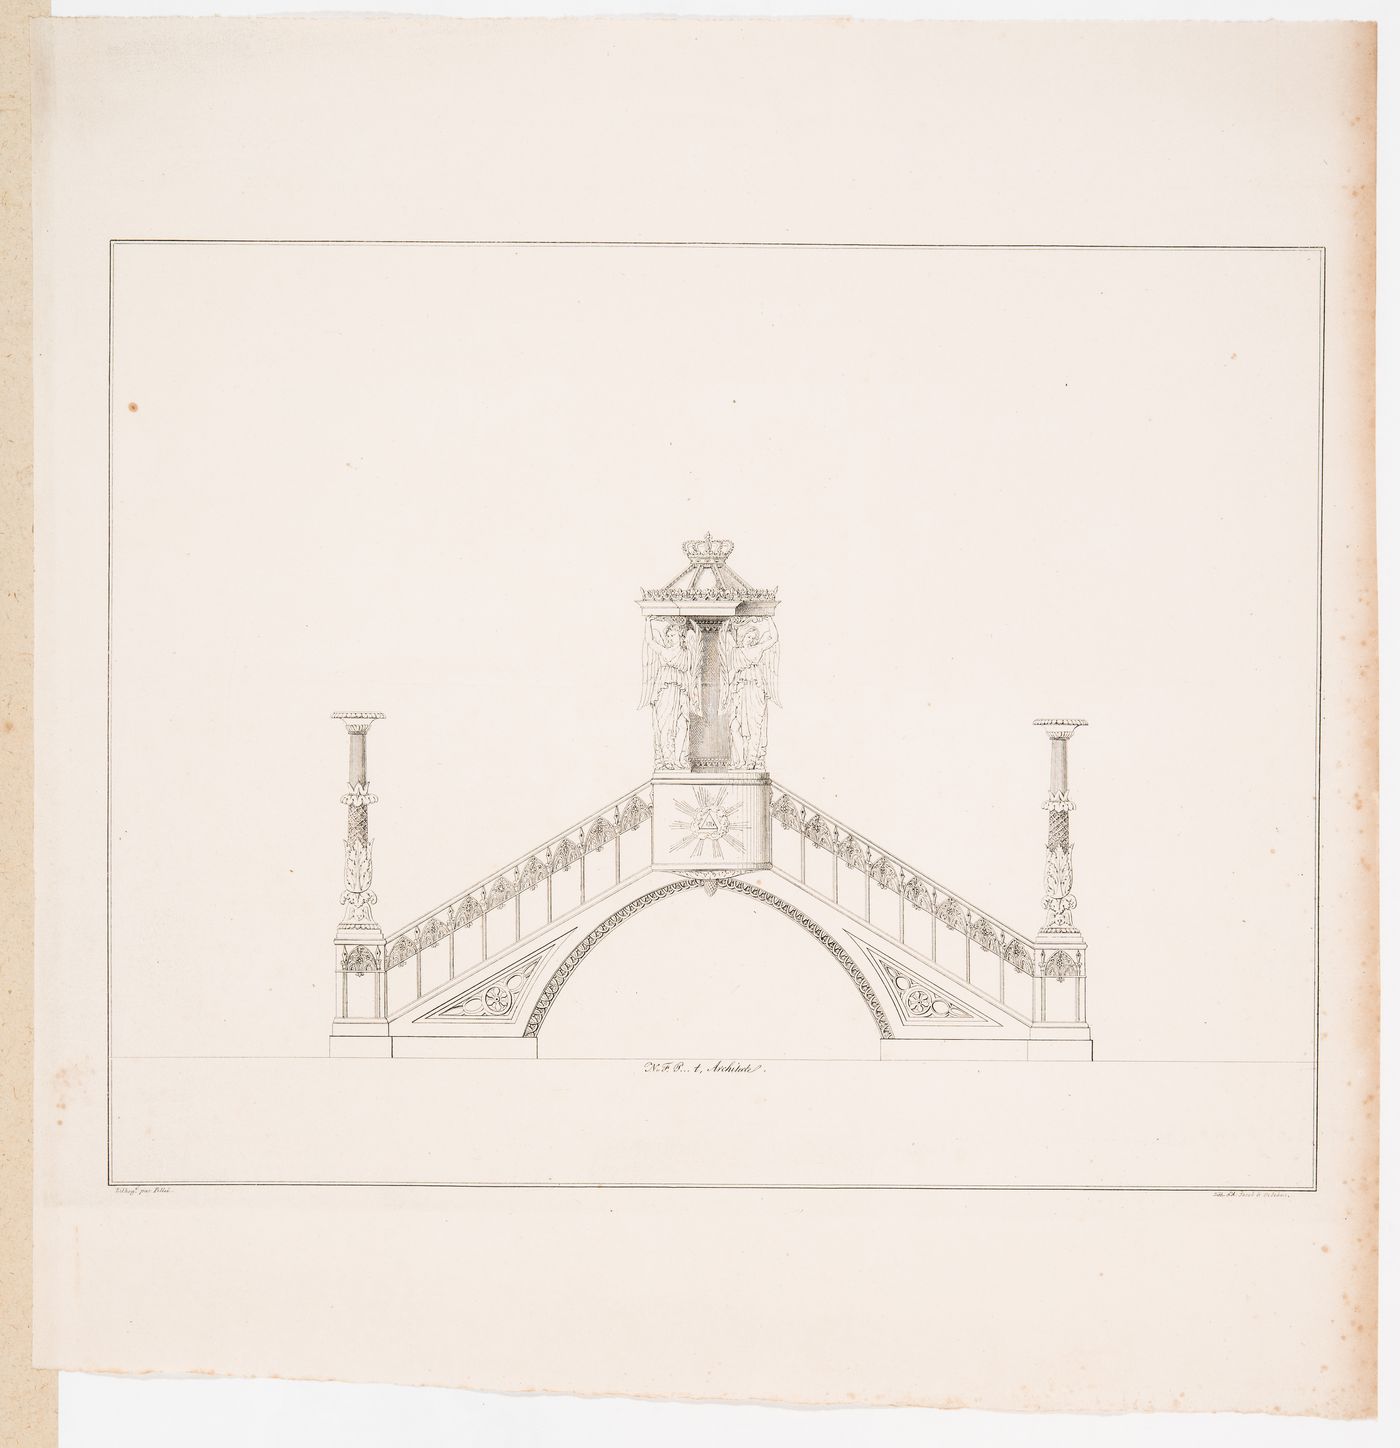 Elevation, possibly of a bridge or pulpit